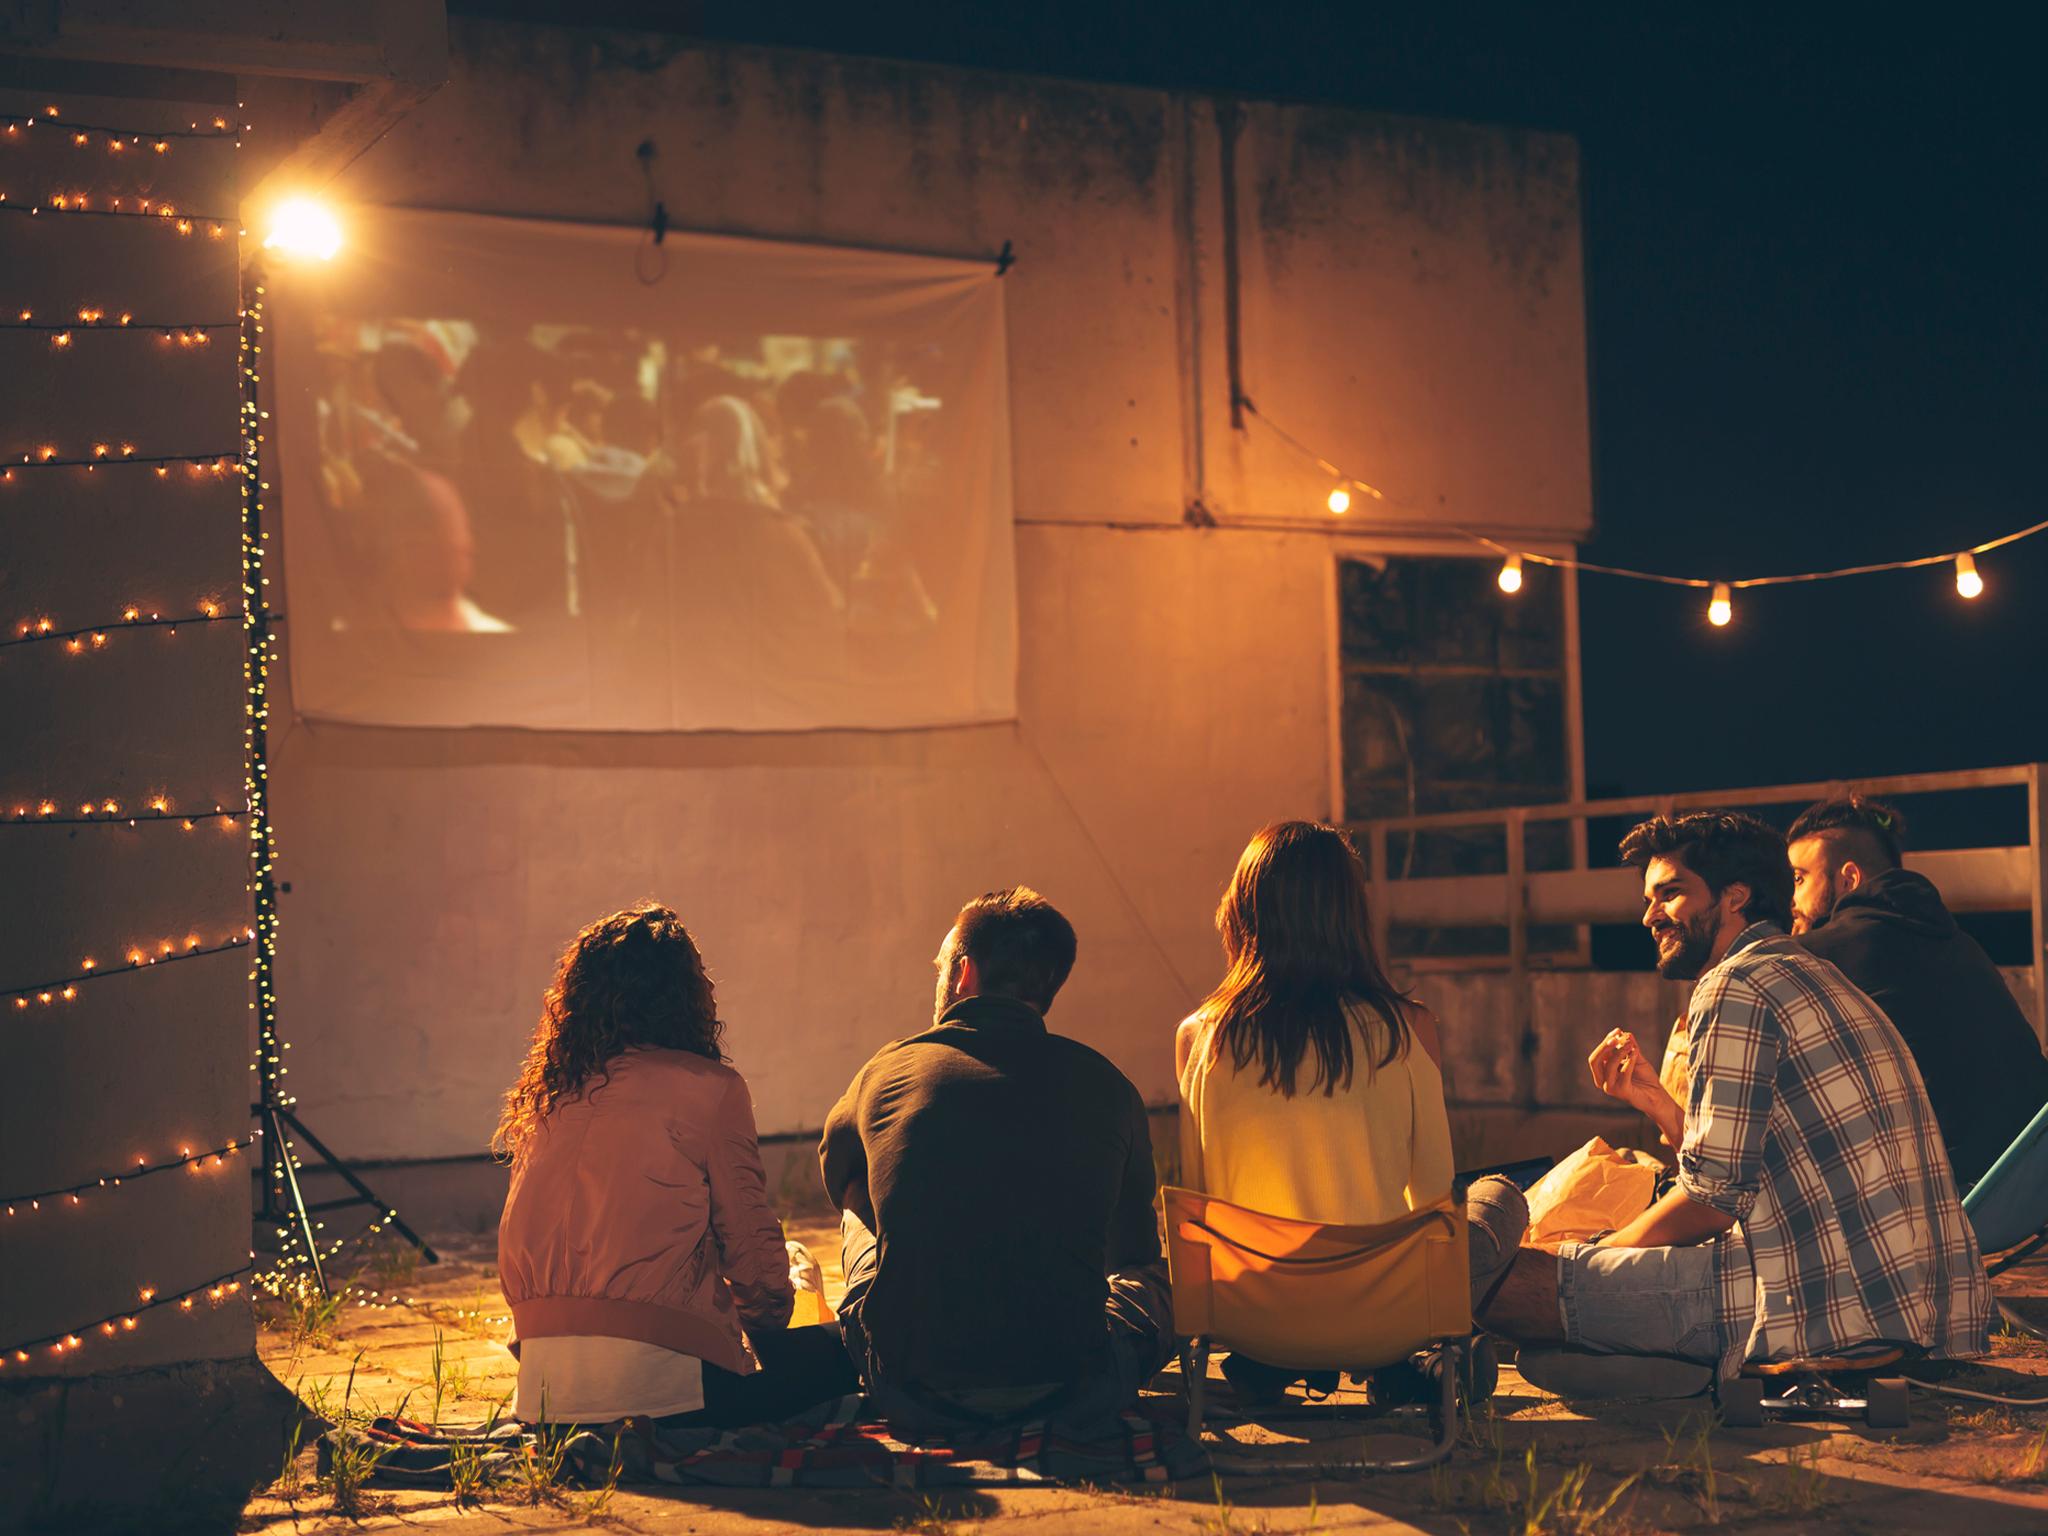 With just a plain white bed sheet and a mini projector, you can create the experience at home